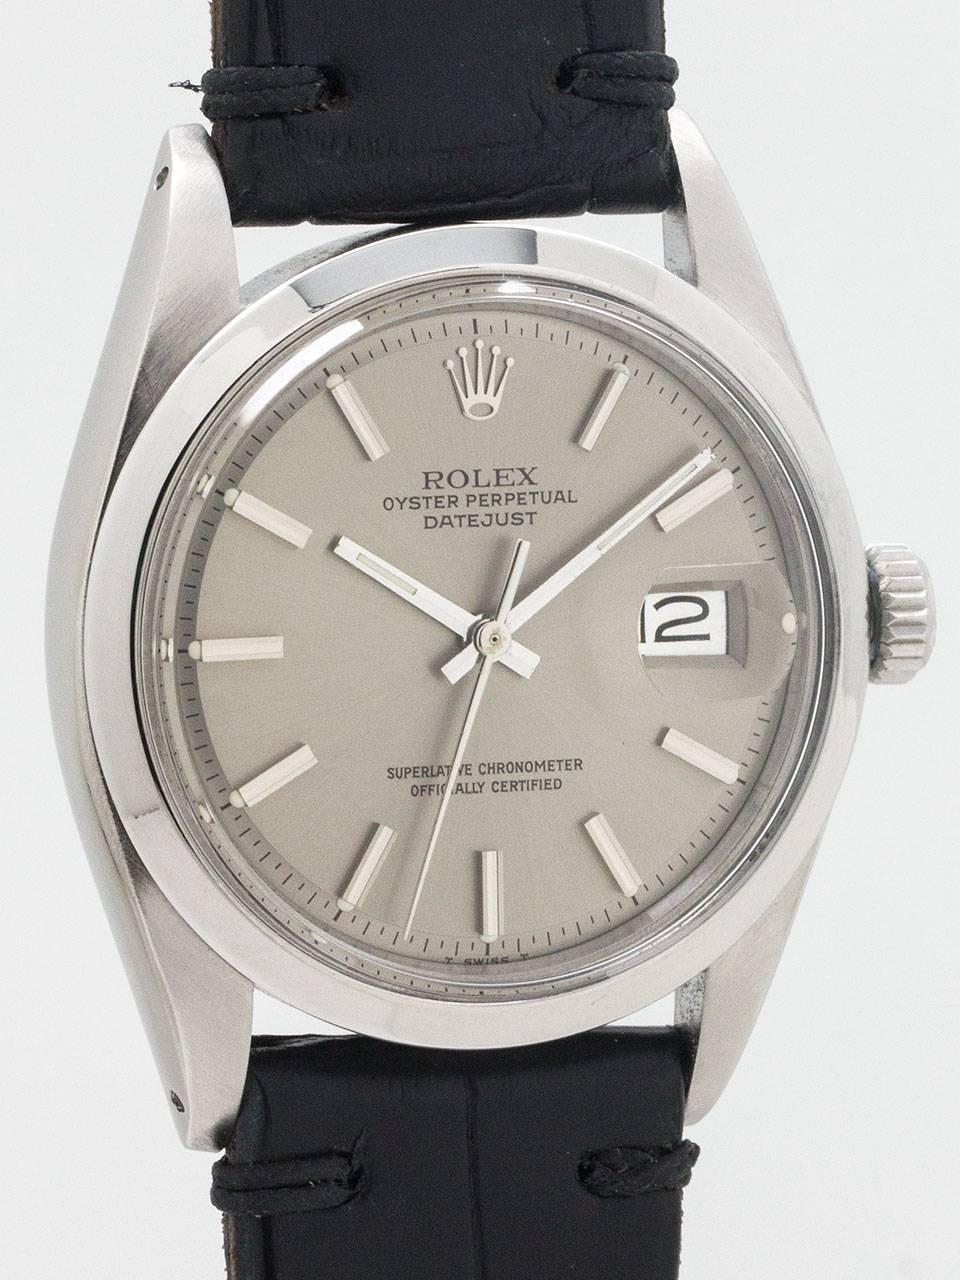 Vintage Rolex Stainless Steel Datejust Wristwatch ref 1600 serial number 3.9 million circa 1974. Featuring 36mm diameter case with smooth bezel, acrylic crystal, and scarce original dark grey pie pan dial with applied silver indexes and silver baton